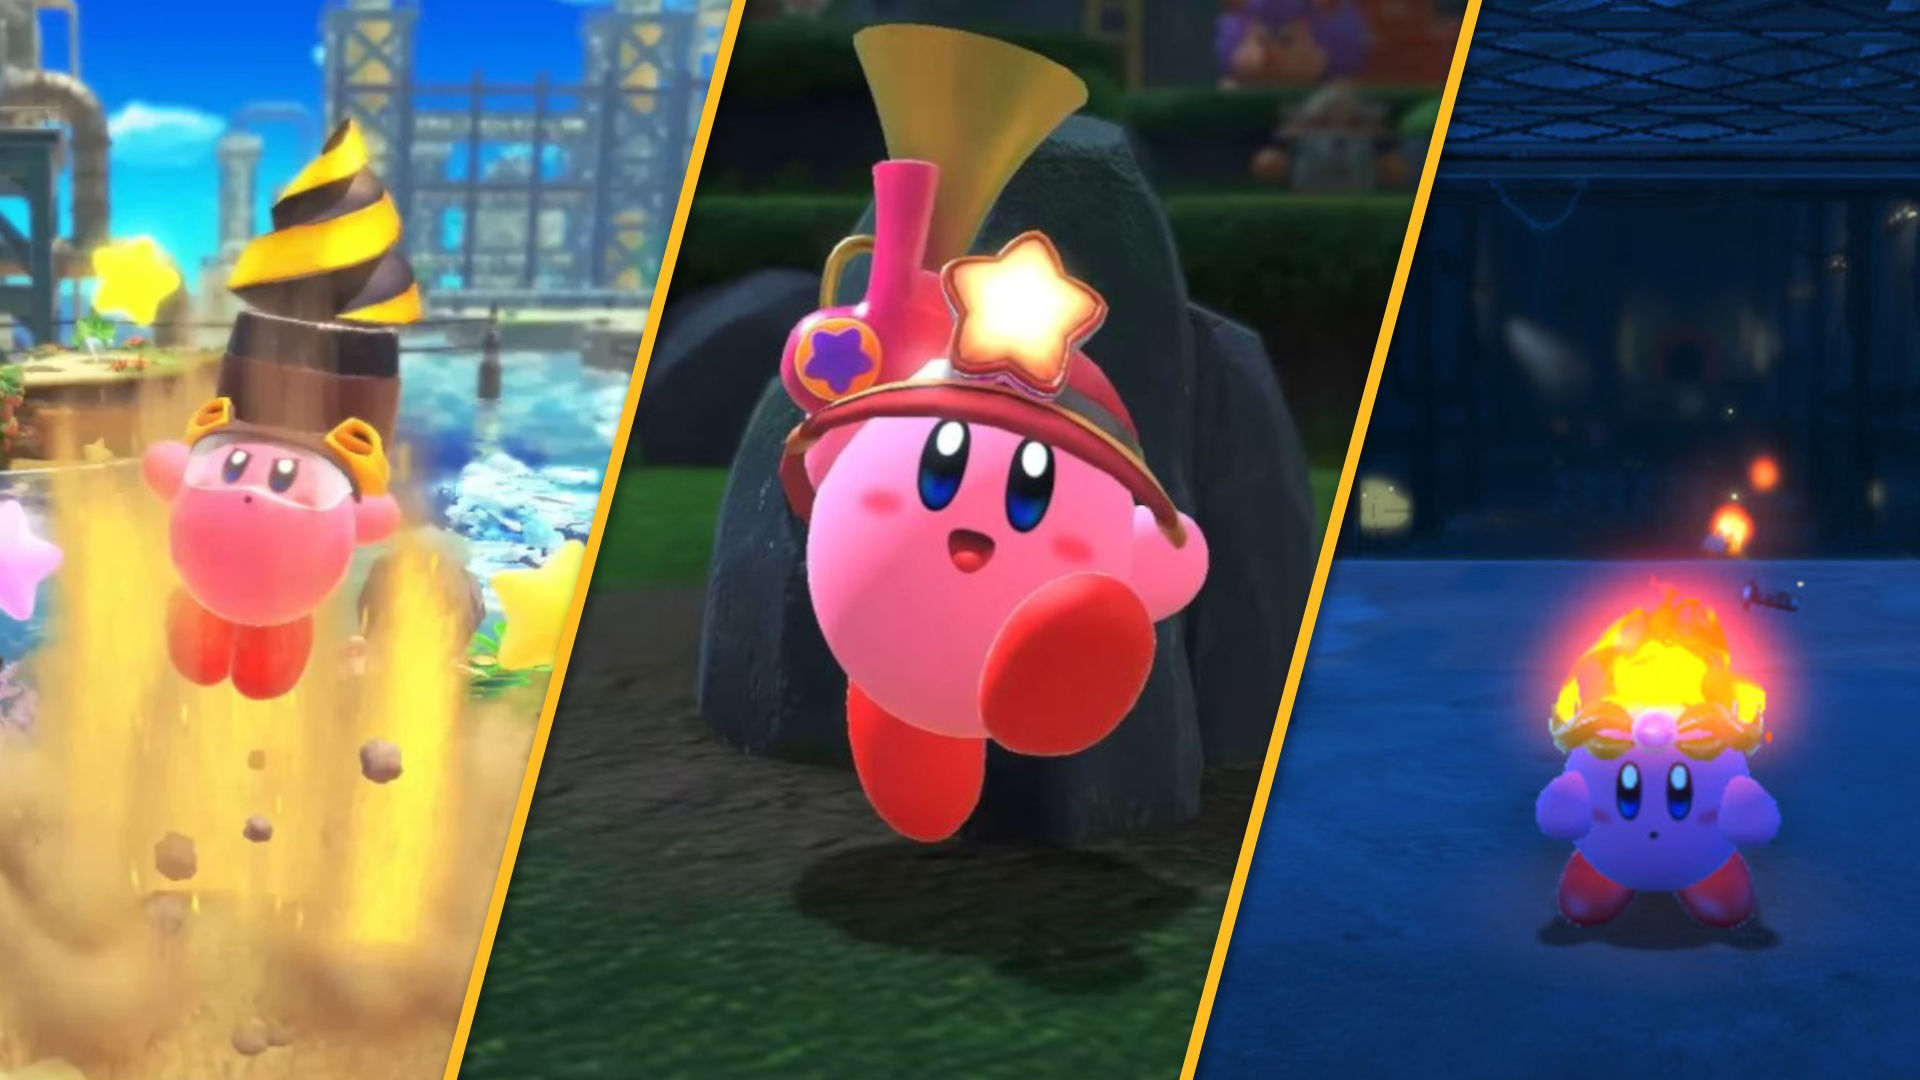 Kirby and the Forgotten Land DLC Should Include More Evolved Copy Abilities